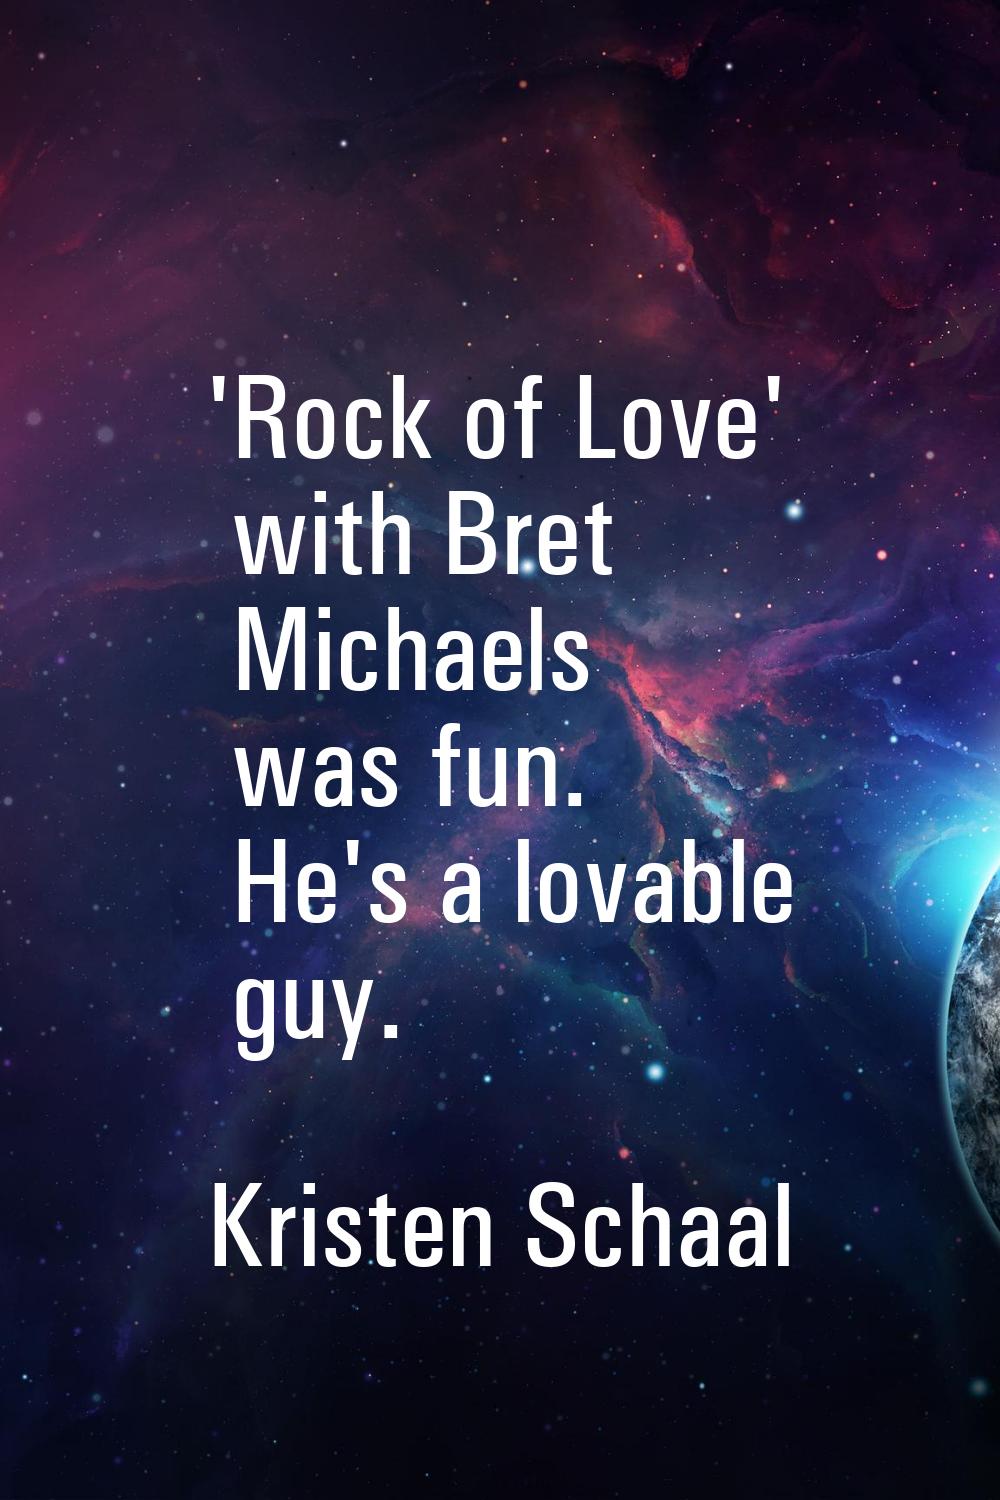 'Rock of Love' with Bret Michaels was fun. He's a lovable guy.